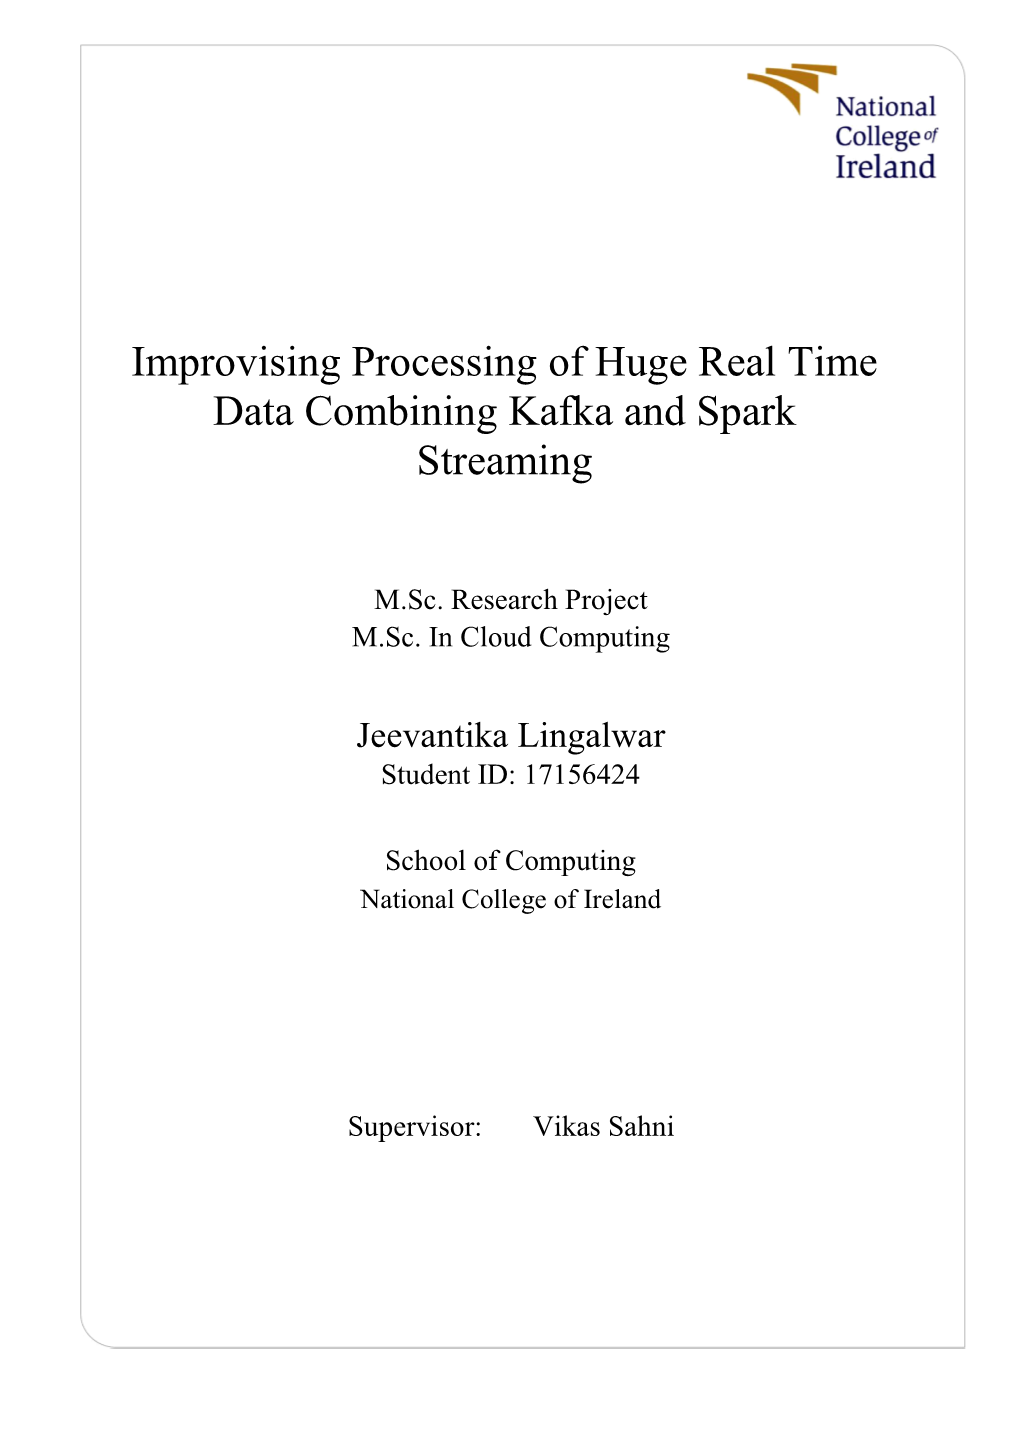 Improvising Processing of Huge Real Time Data Combining Kafka and Spark Streaming